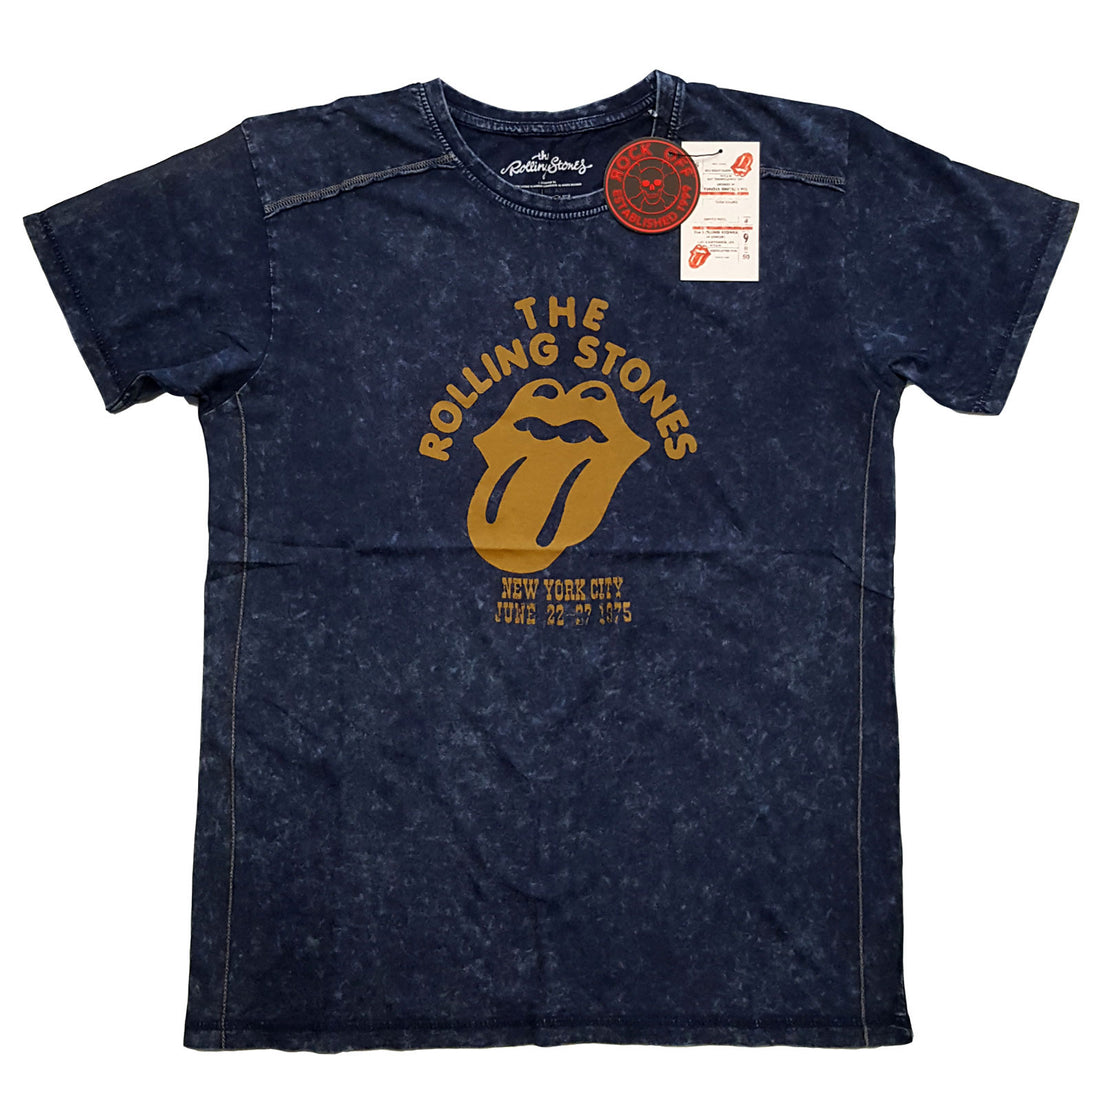 The Rolling Stones Unisex T-Shirt: NYC '75 (Wash Collection)